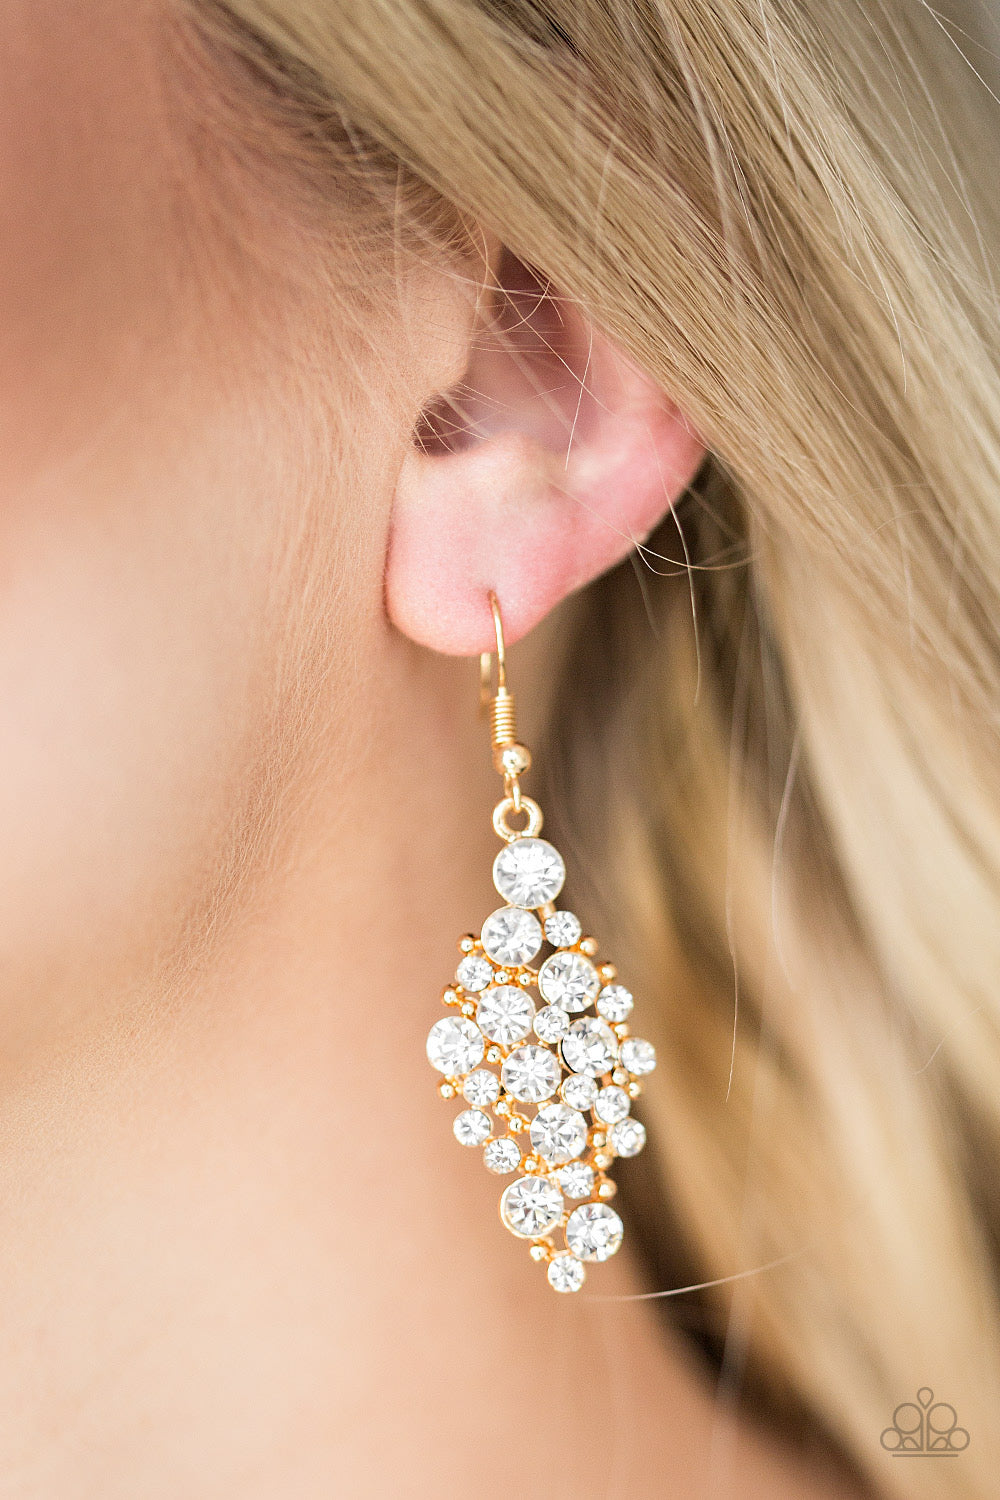 Cosmically Chic - Gold Earring 2619E